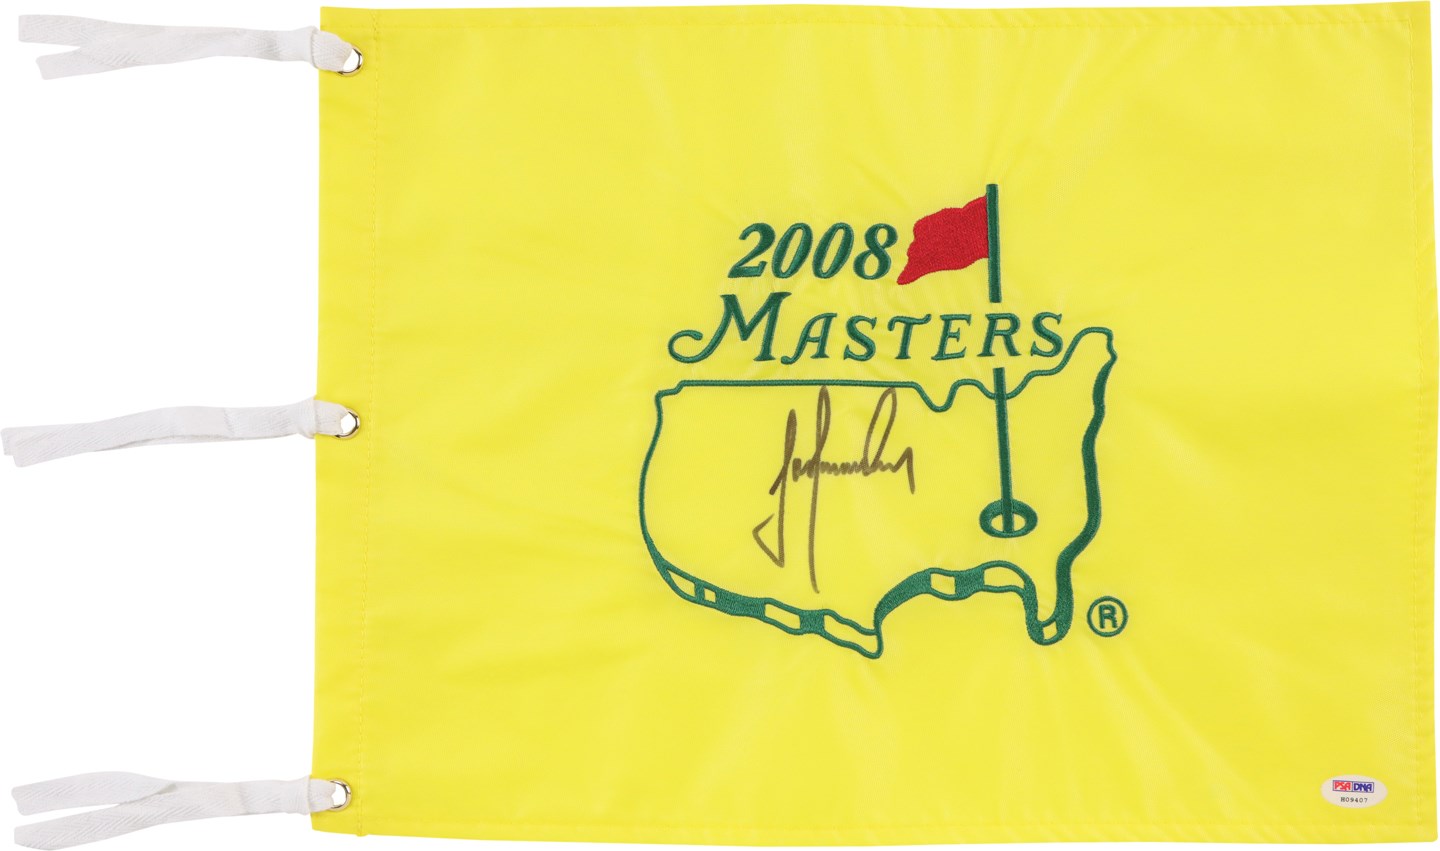 Olympics and All Sports - Trevor Immelman Signed 2008 Masters Flag (PSA)